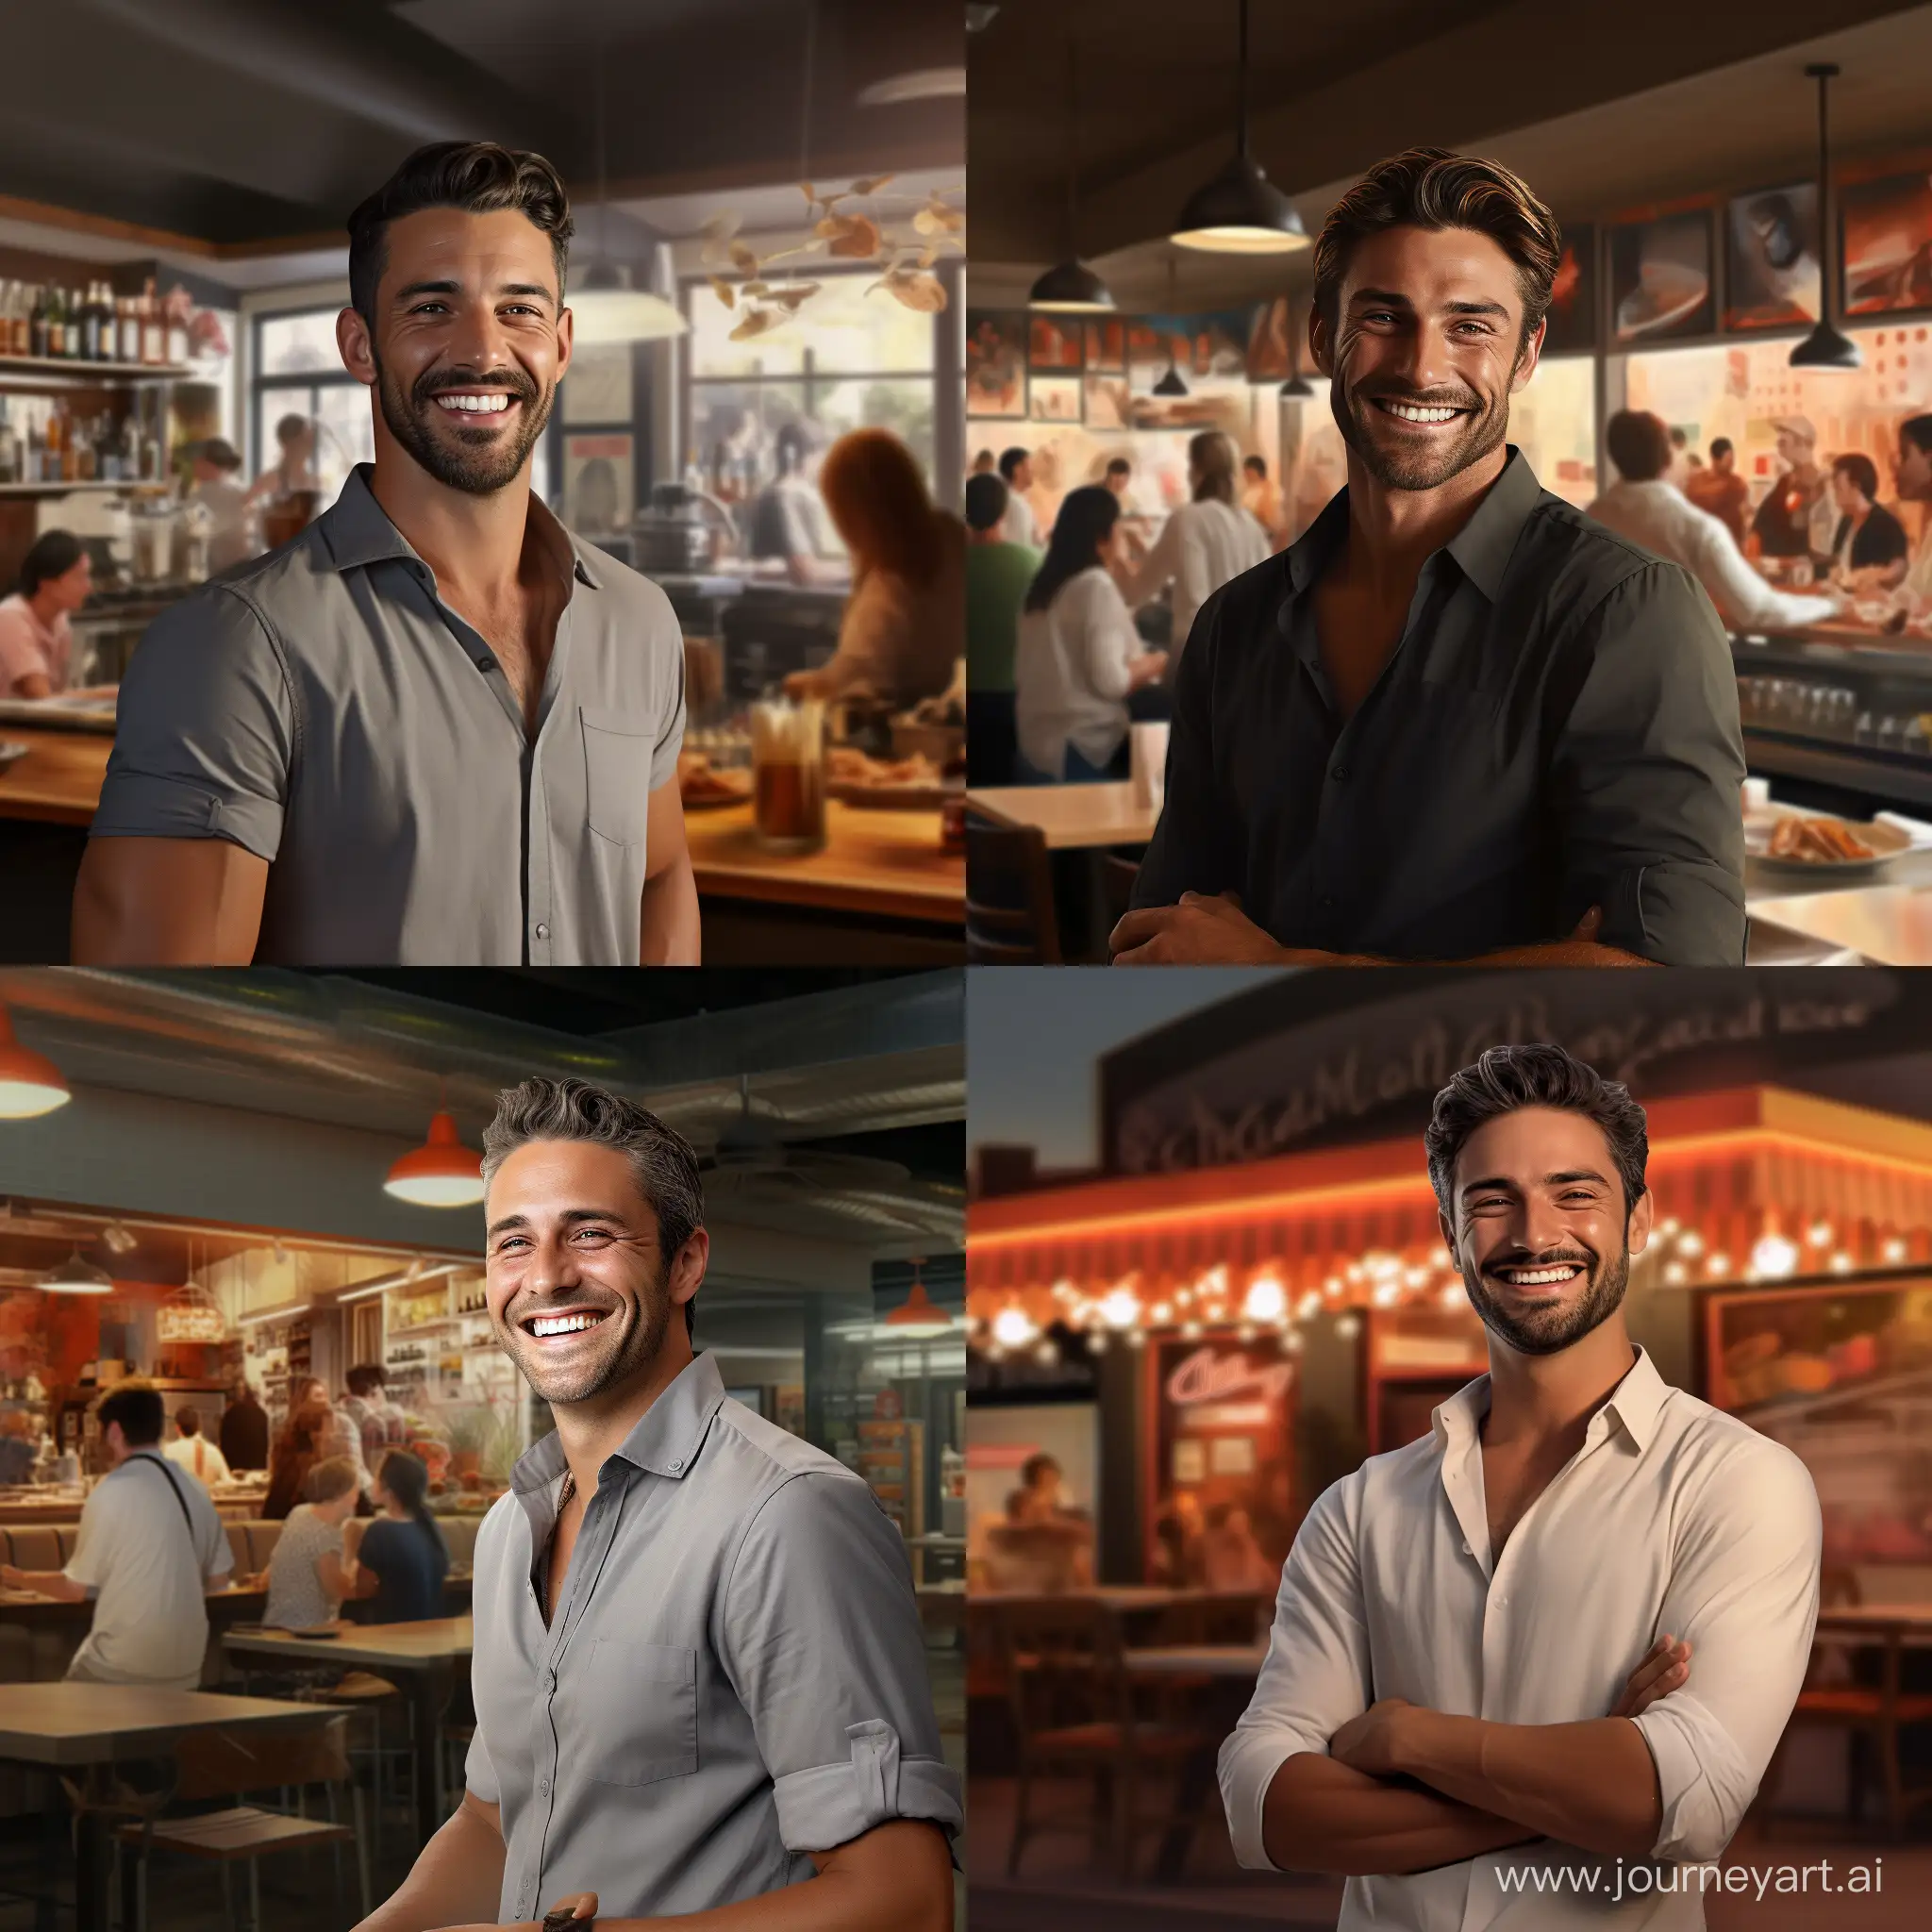 photorealistic image of a male restaurant owner smiling, with the restaurant shown in the background